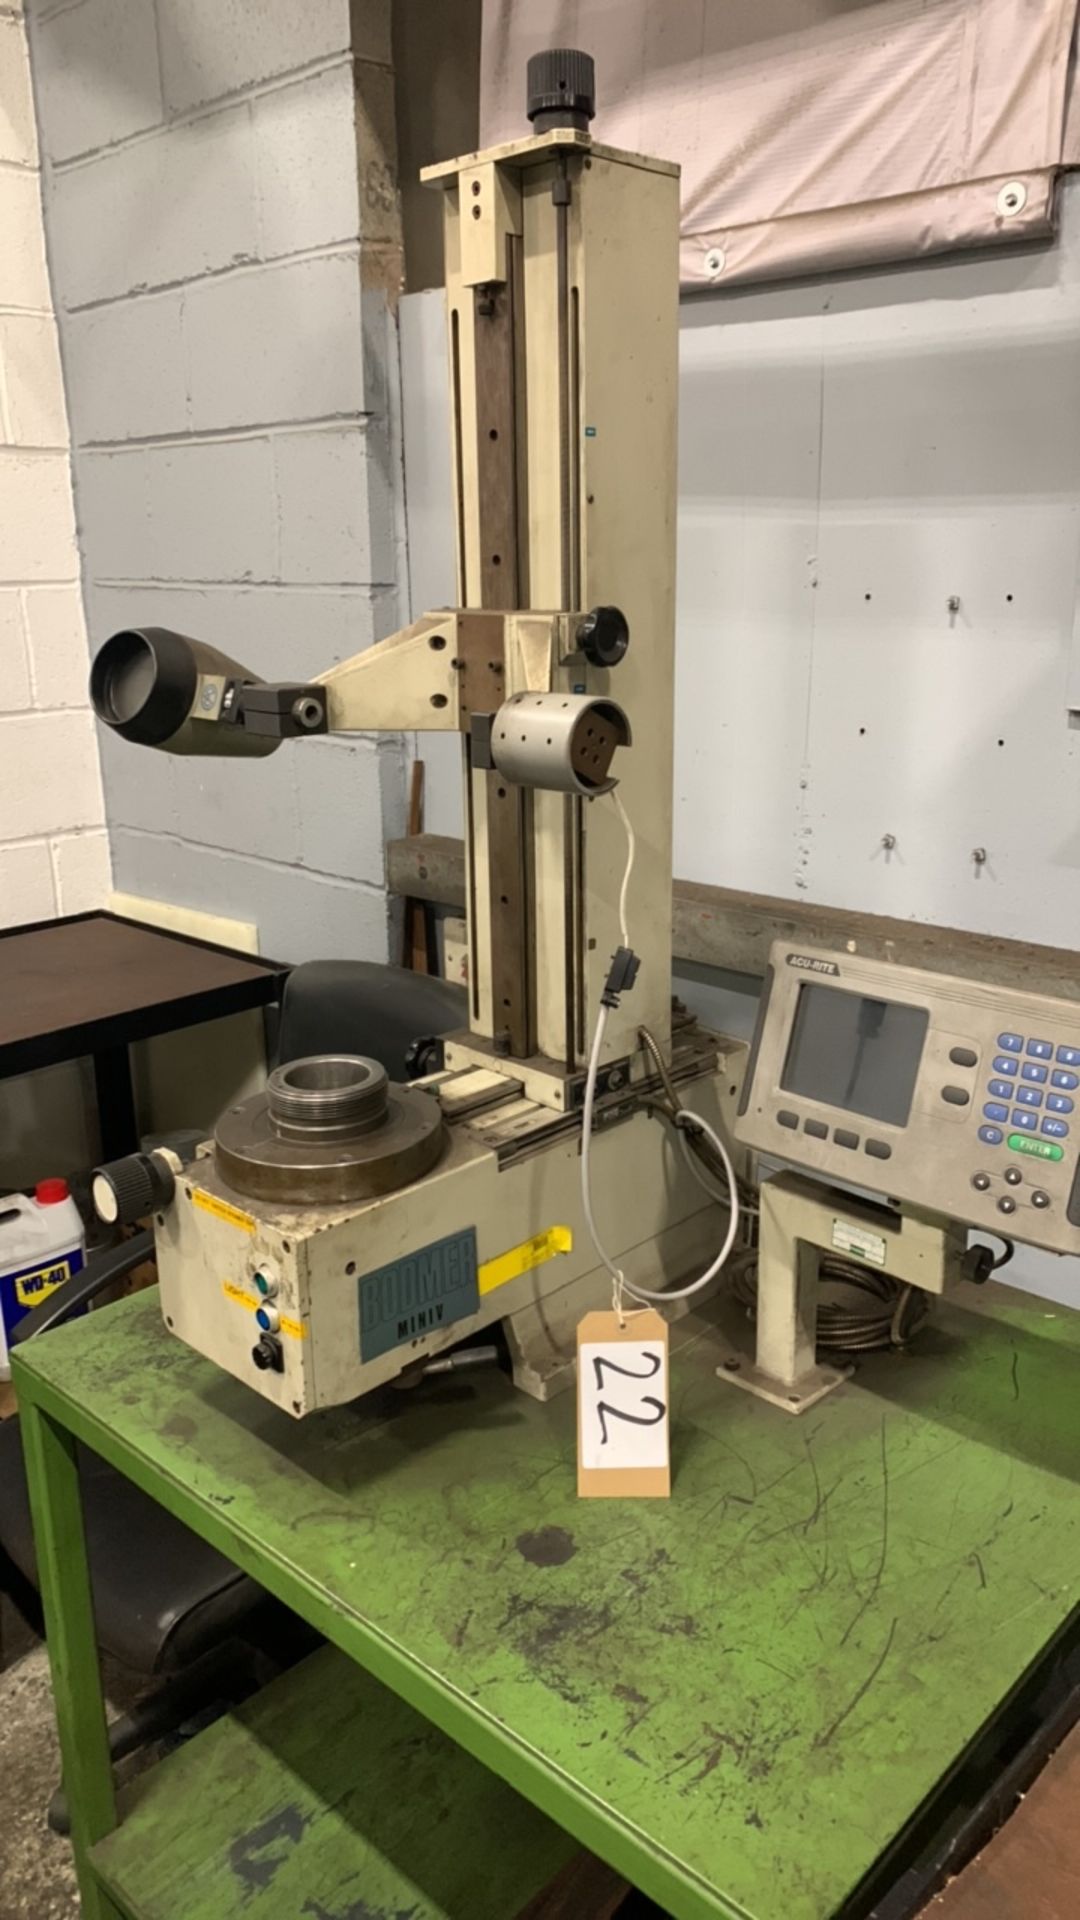 Ernst Bodmer Model Miniv-350 Tool Measuring Device, Serial No.3095 with Acu-Rite Control Panel an